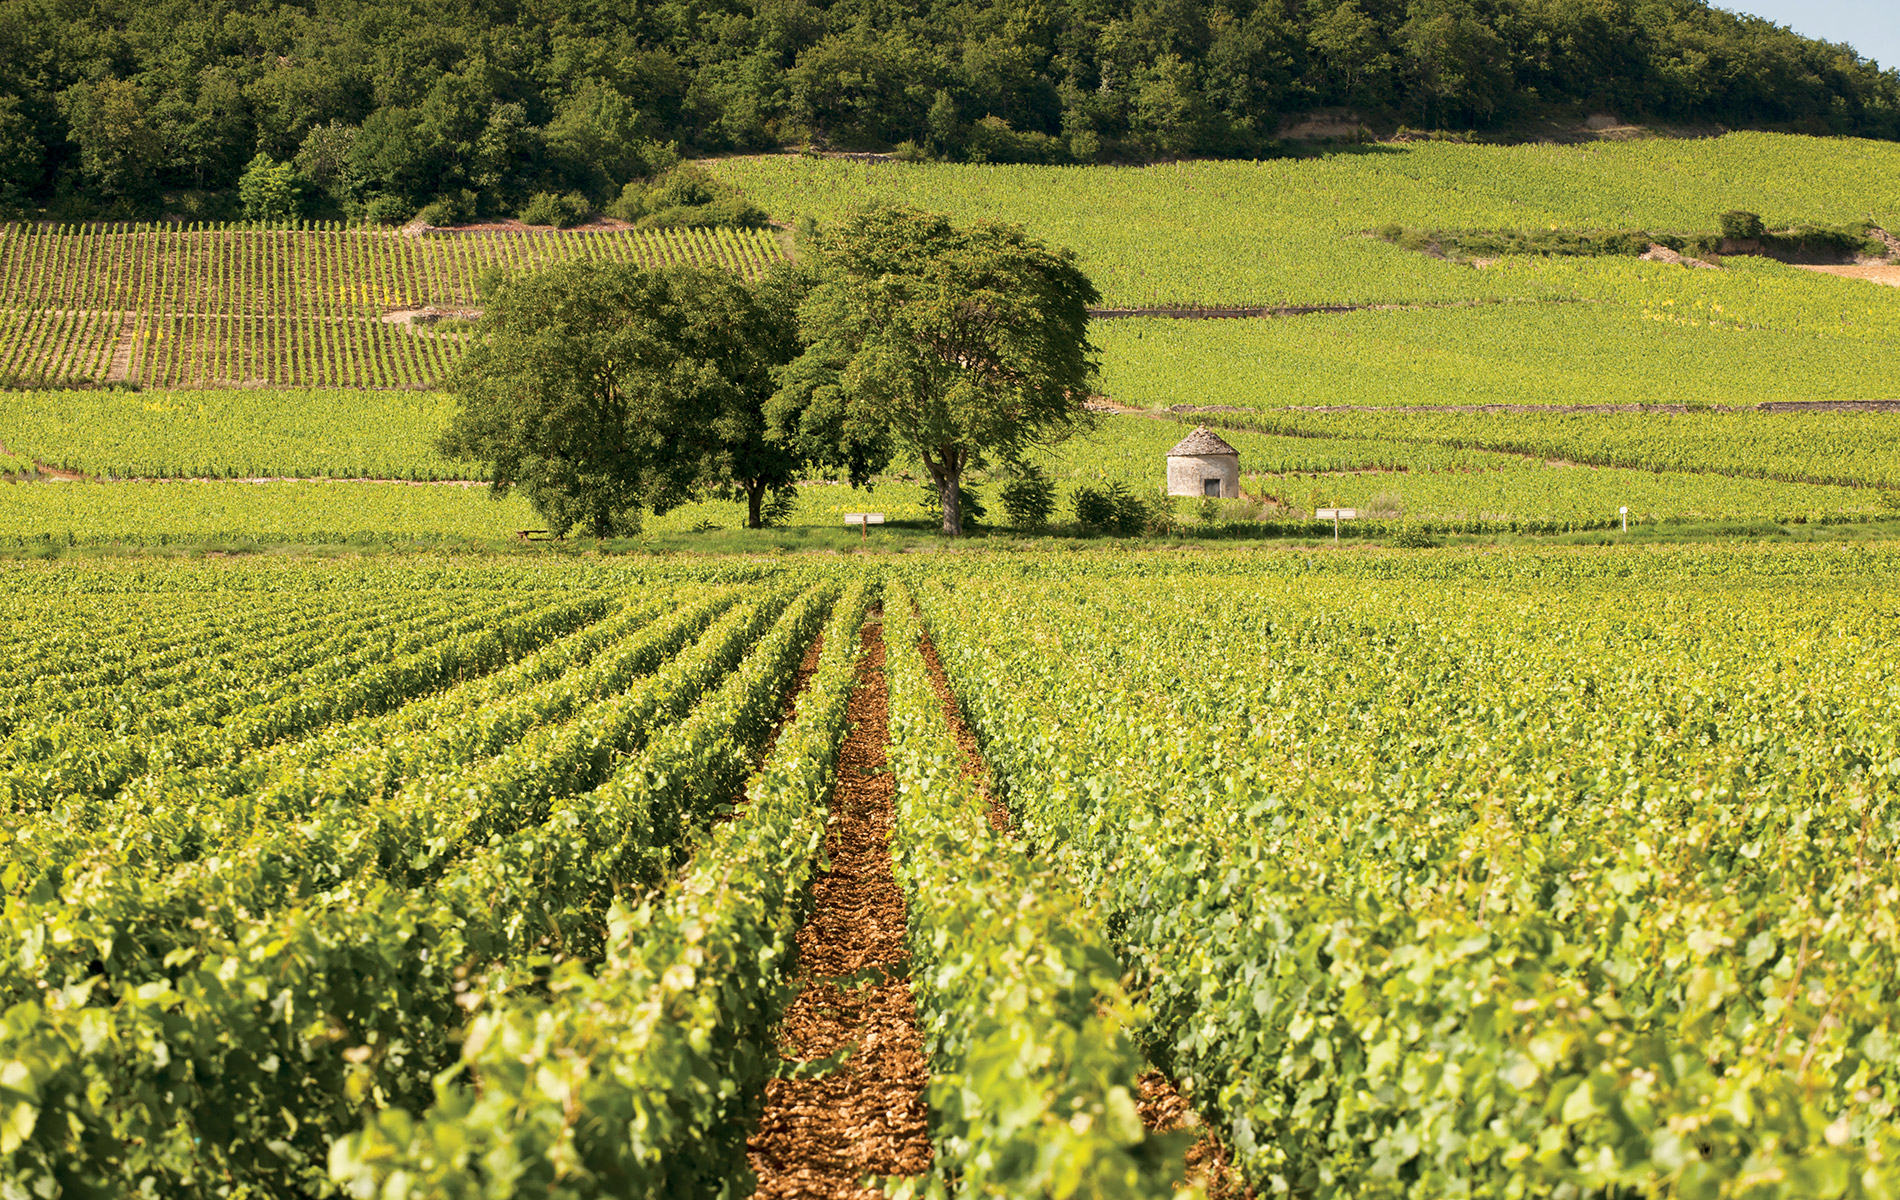 Domaine de Cromey is a picturesque winery and château located in the scenic heart of Burgundy, France.